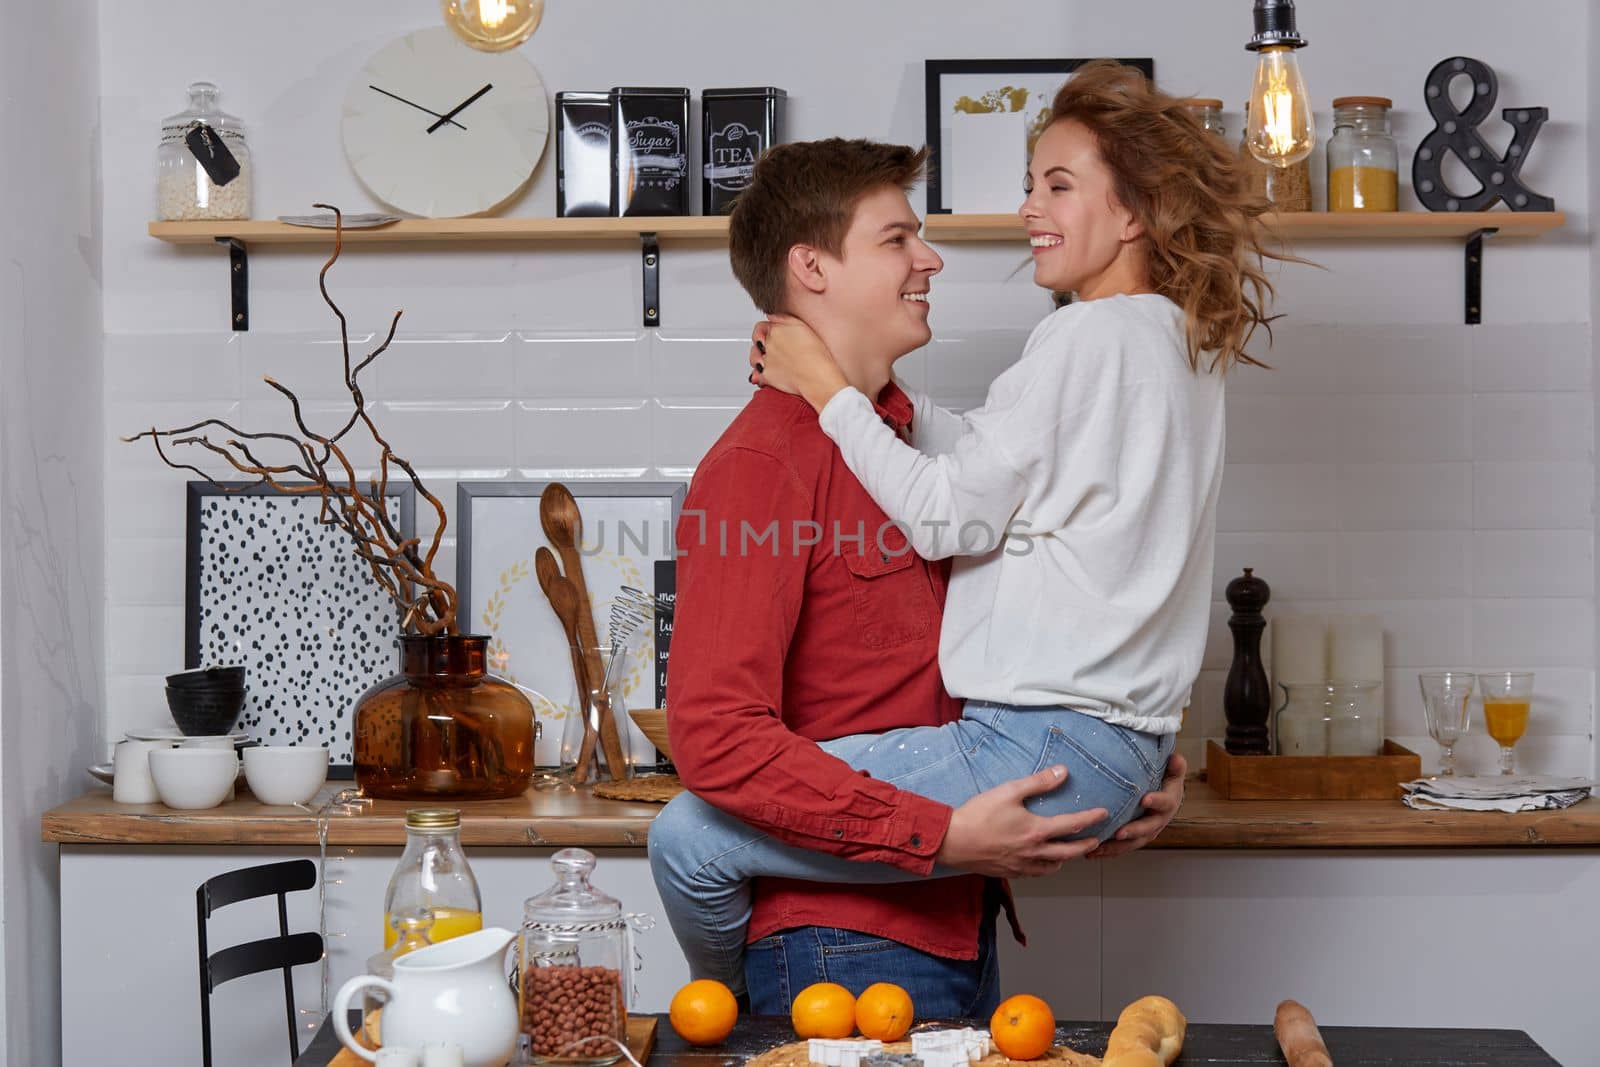 Happy young lovely couple on kitchen hugging each other. They enjoy spending time togehter. The man holding his girlfriend